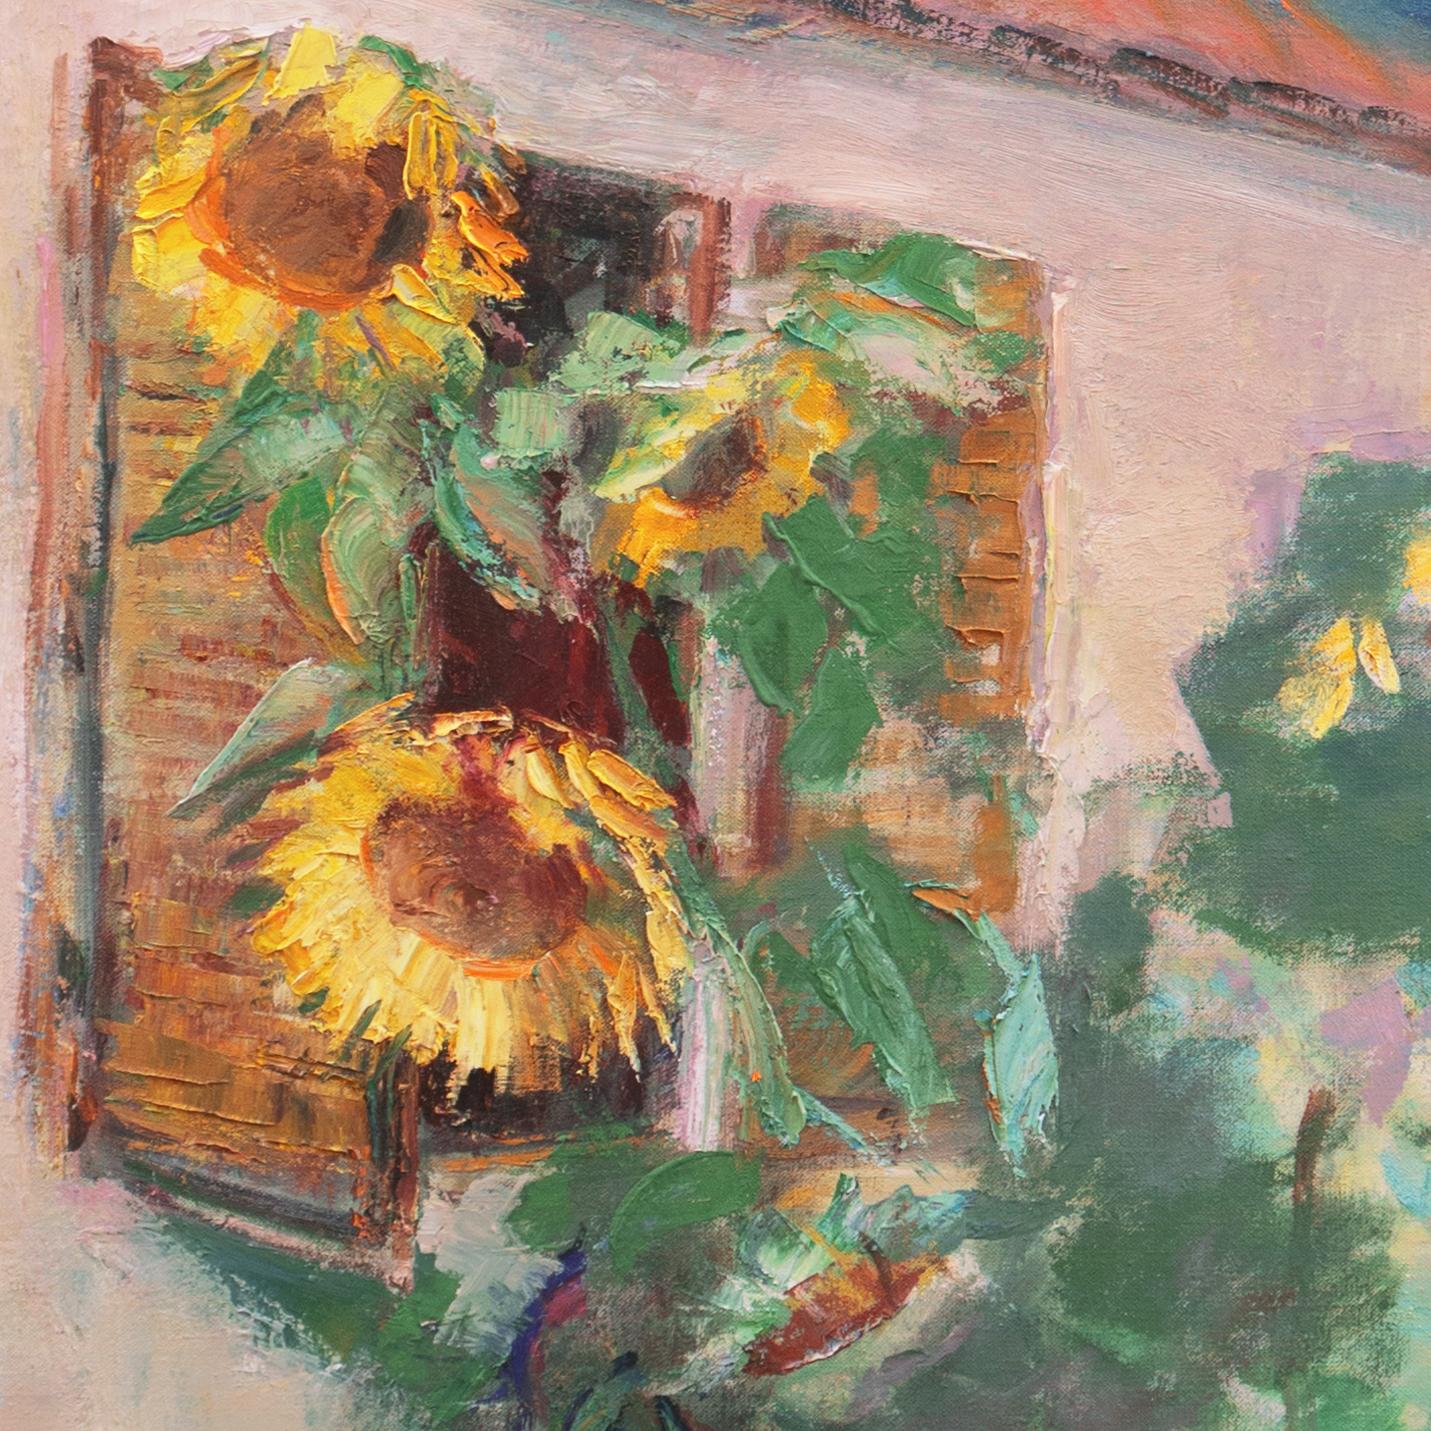 'Sunflowers in the Garden', Tuscan Villa, Tuscany - Painting by M. v R.